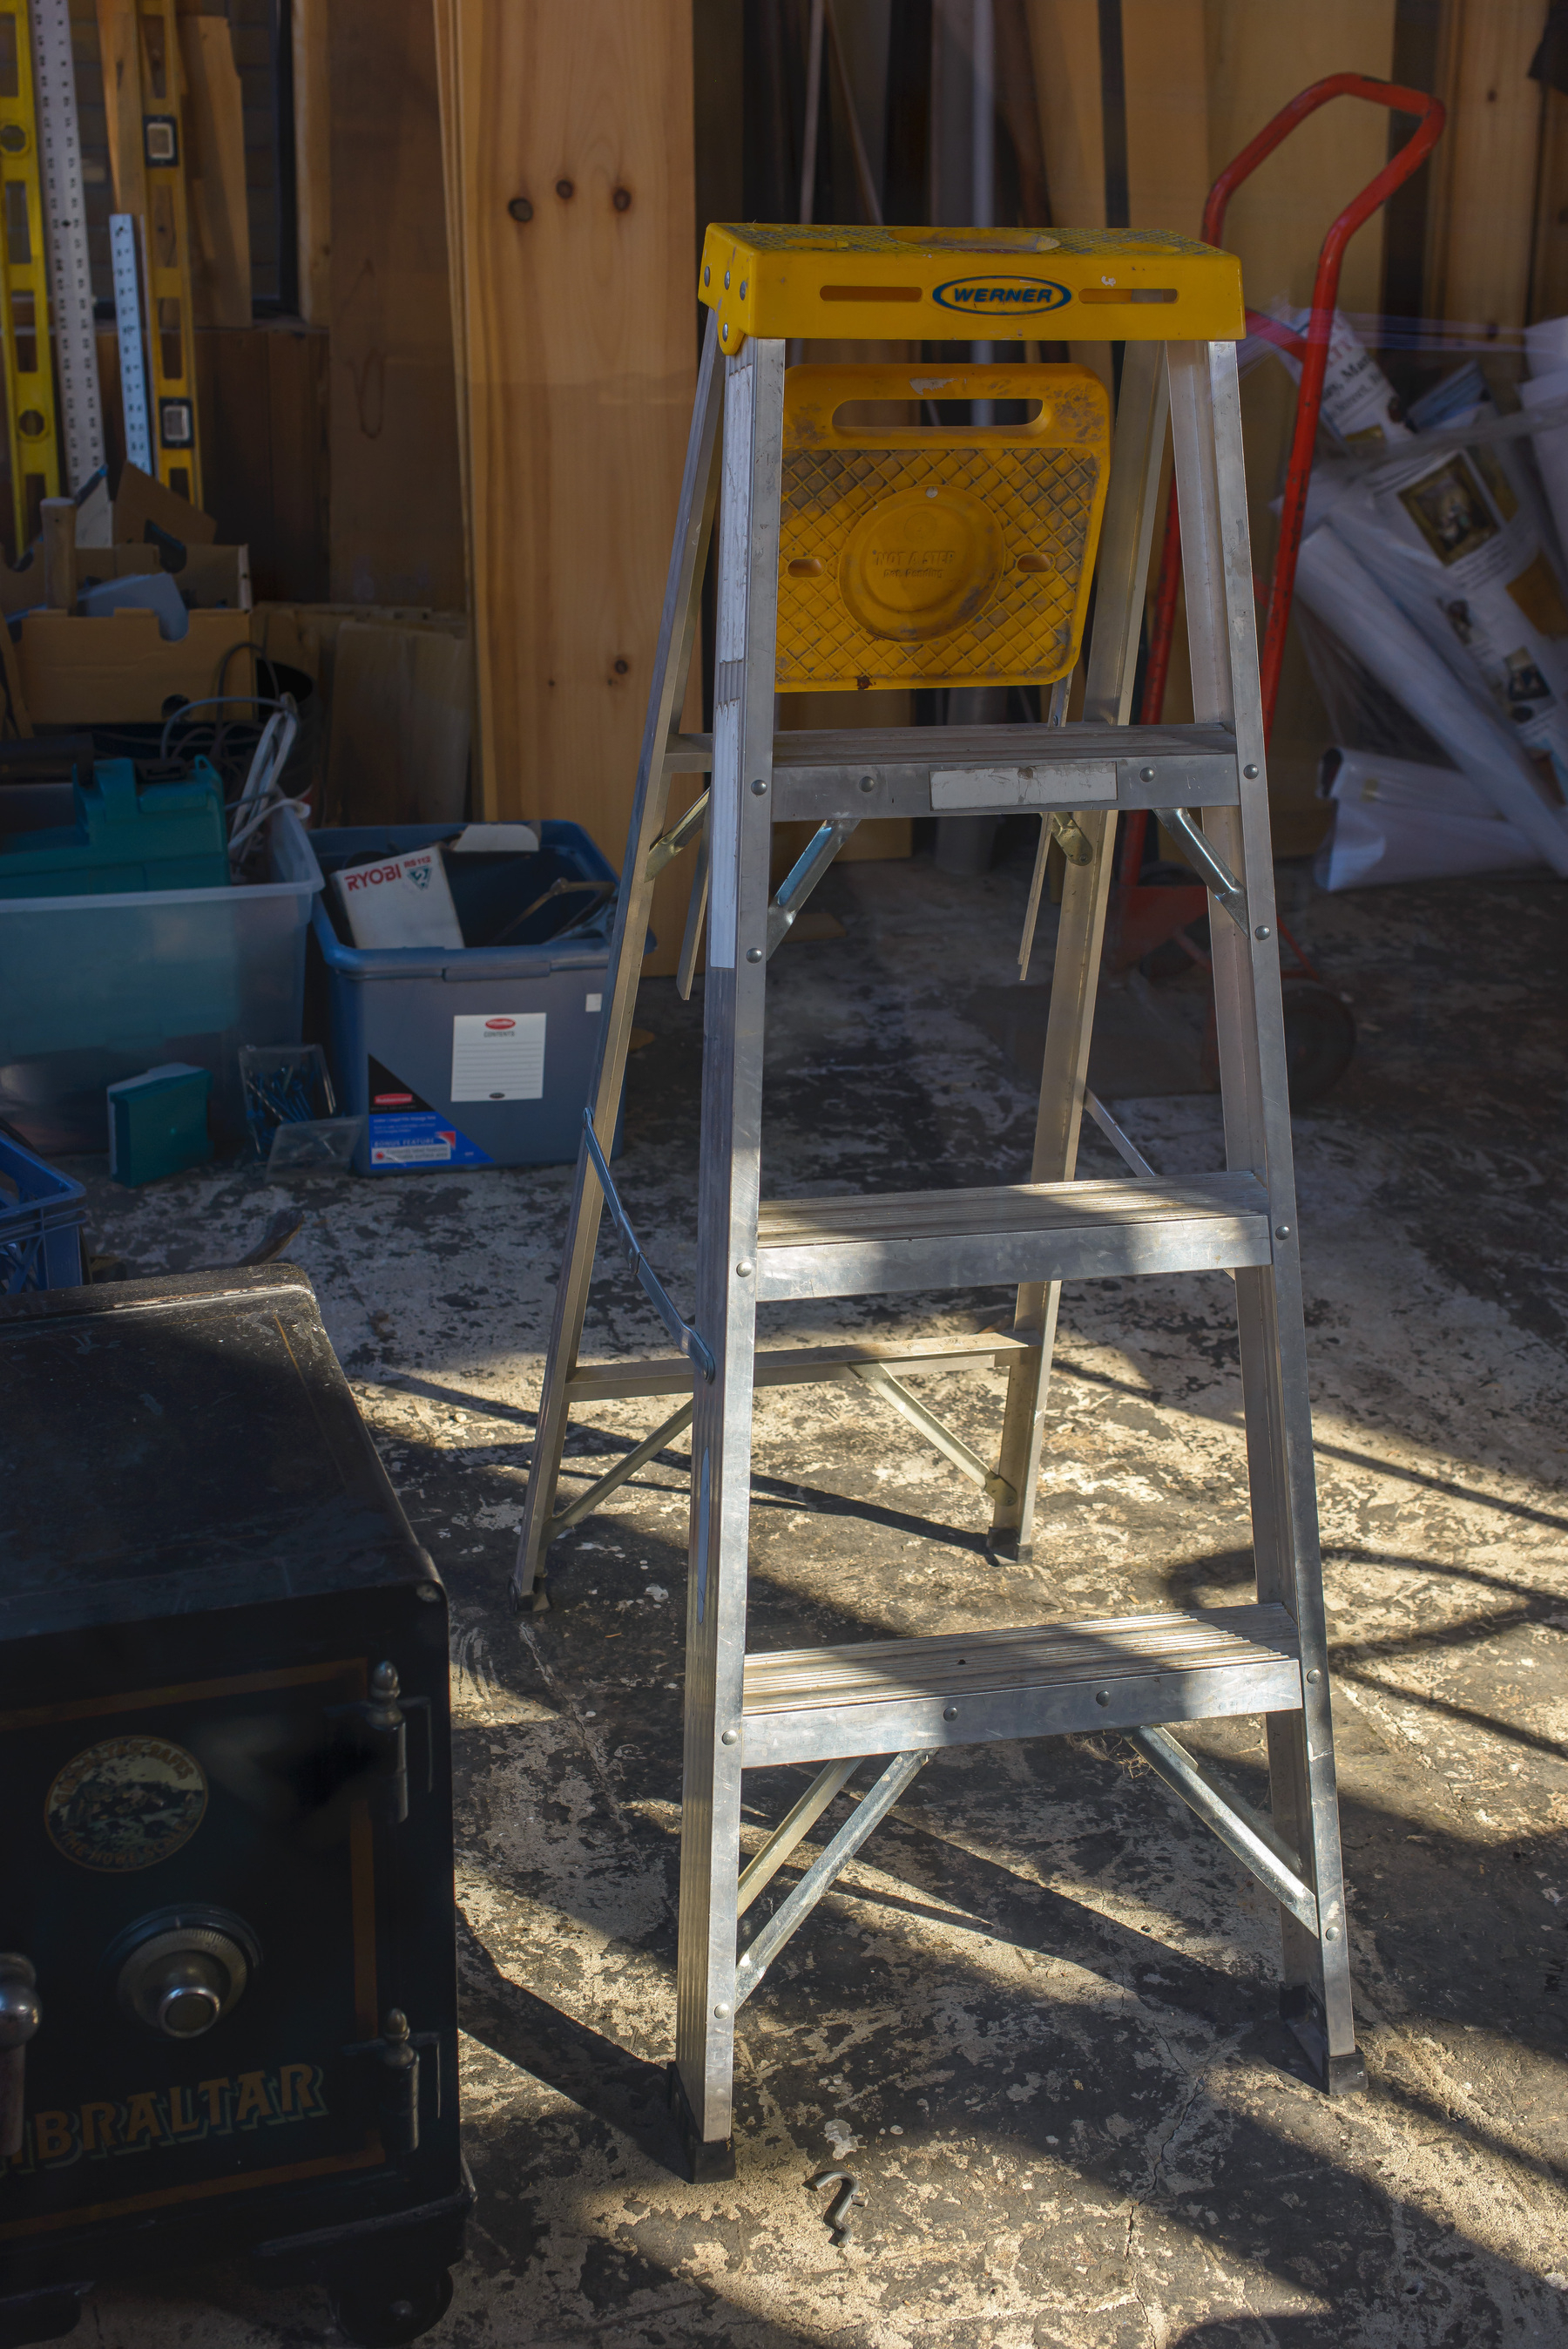 aluminum ladder in a space under construction, sunlight streaming in from the light across the floor and the lower two rungs of the laser